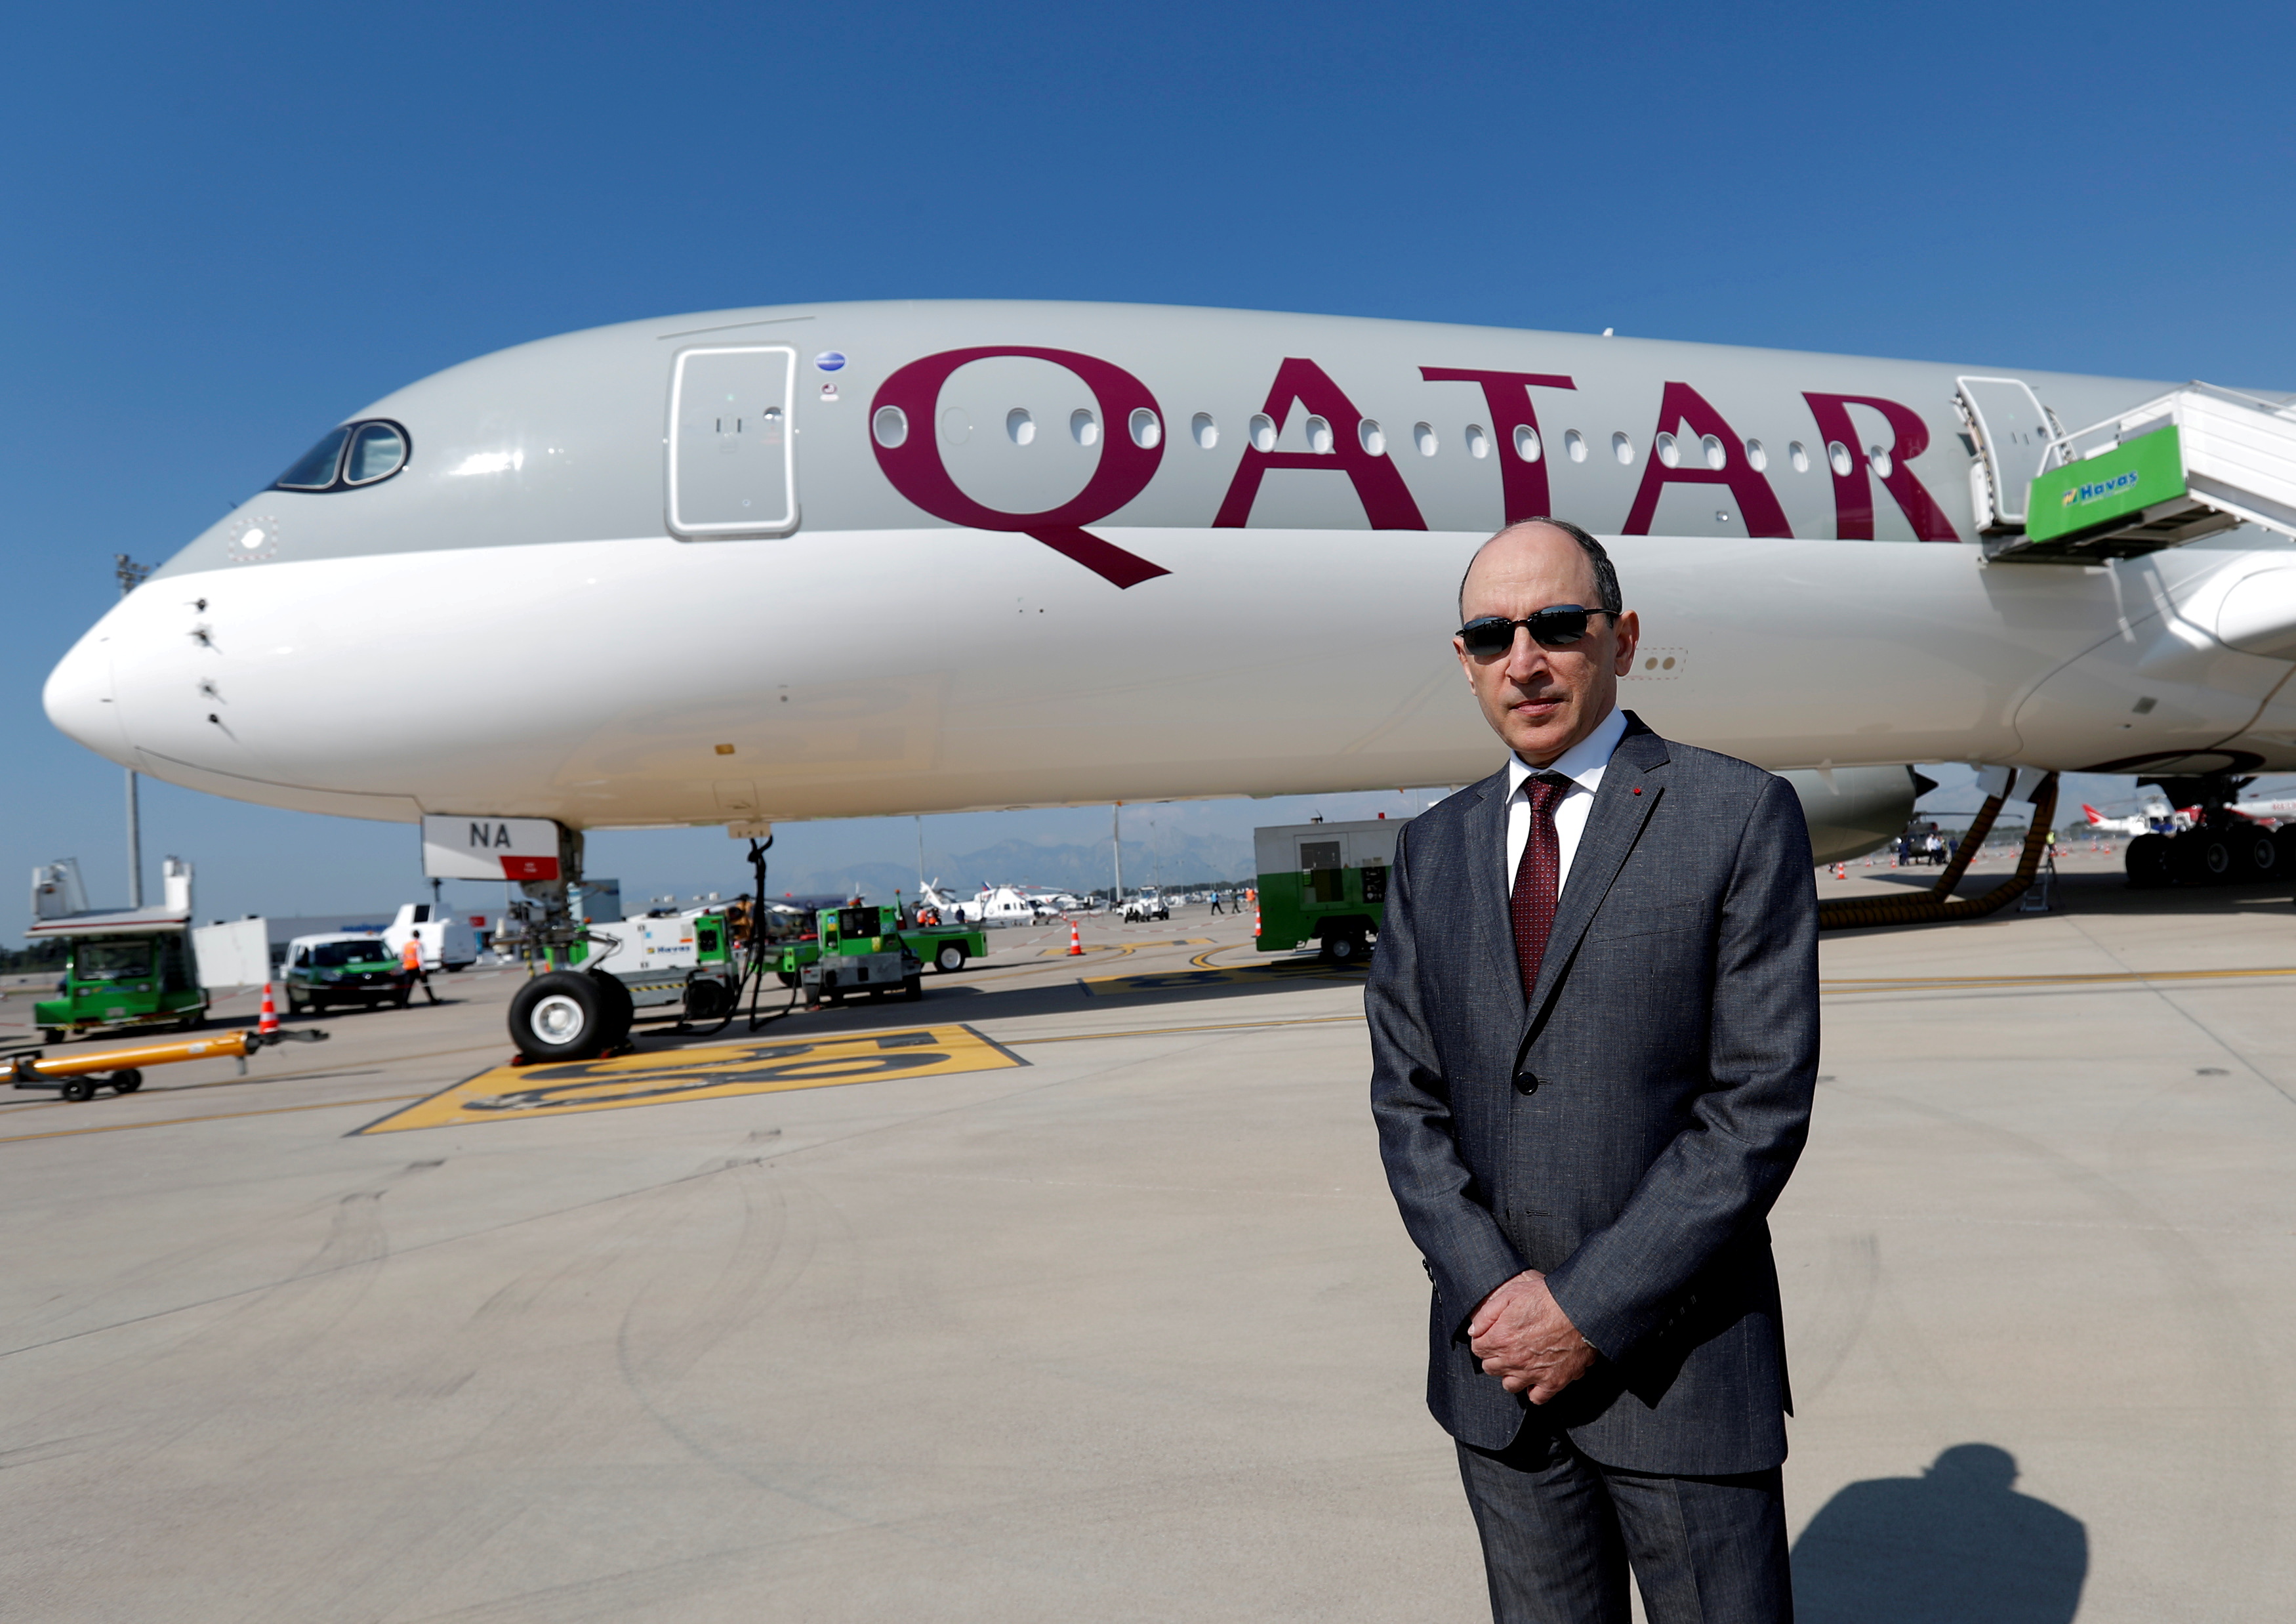 Qatar Airways Chief Executive Officer Akbar al-Baker poses in front of an Airbus A350-1000 at the Eurasia Airshow in the Mediterranean resort city of Antalya